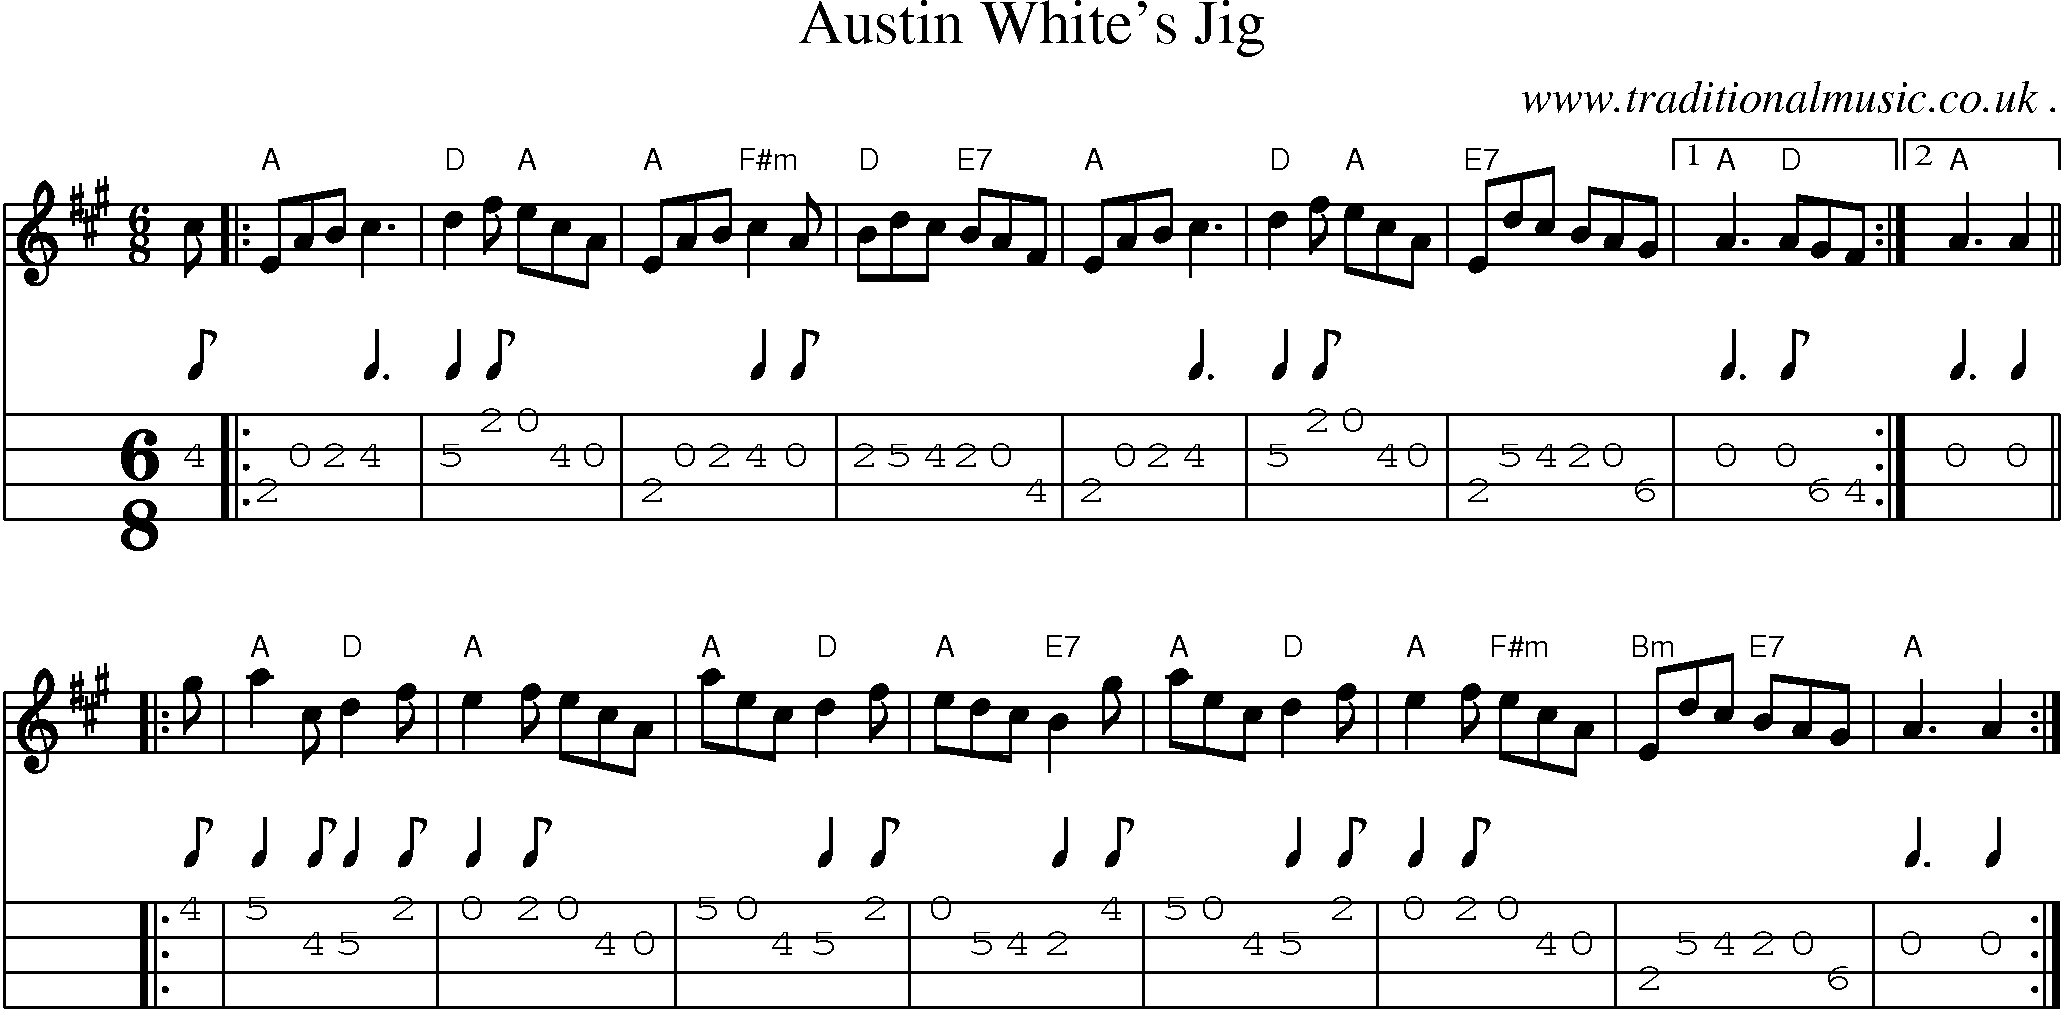 Sheet-music  score, Chords and Mandolin Tabs for Austin Whites Jig